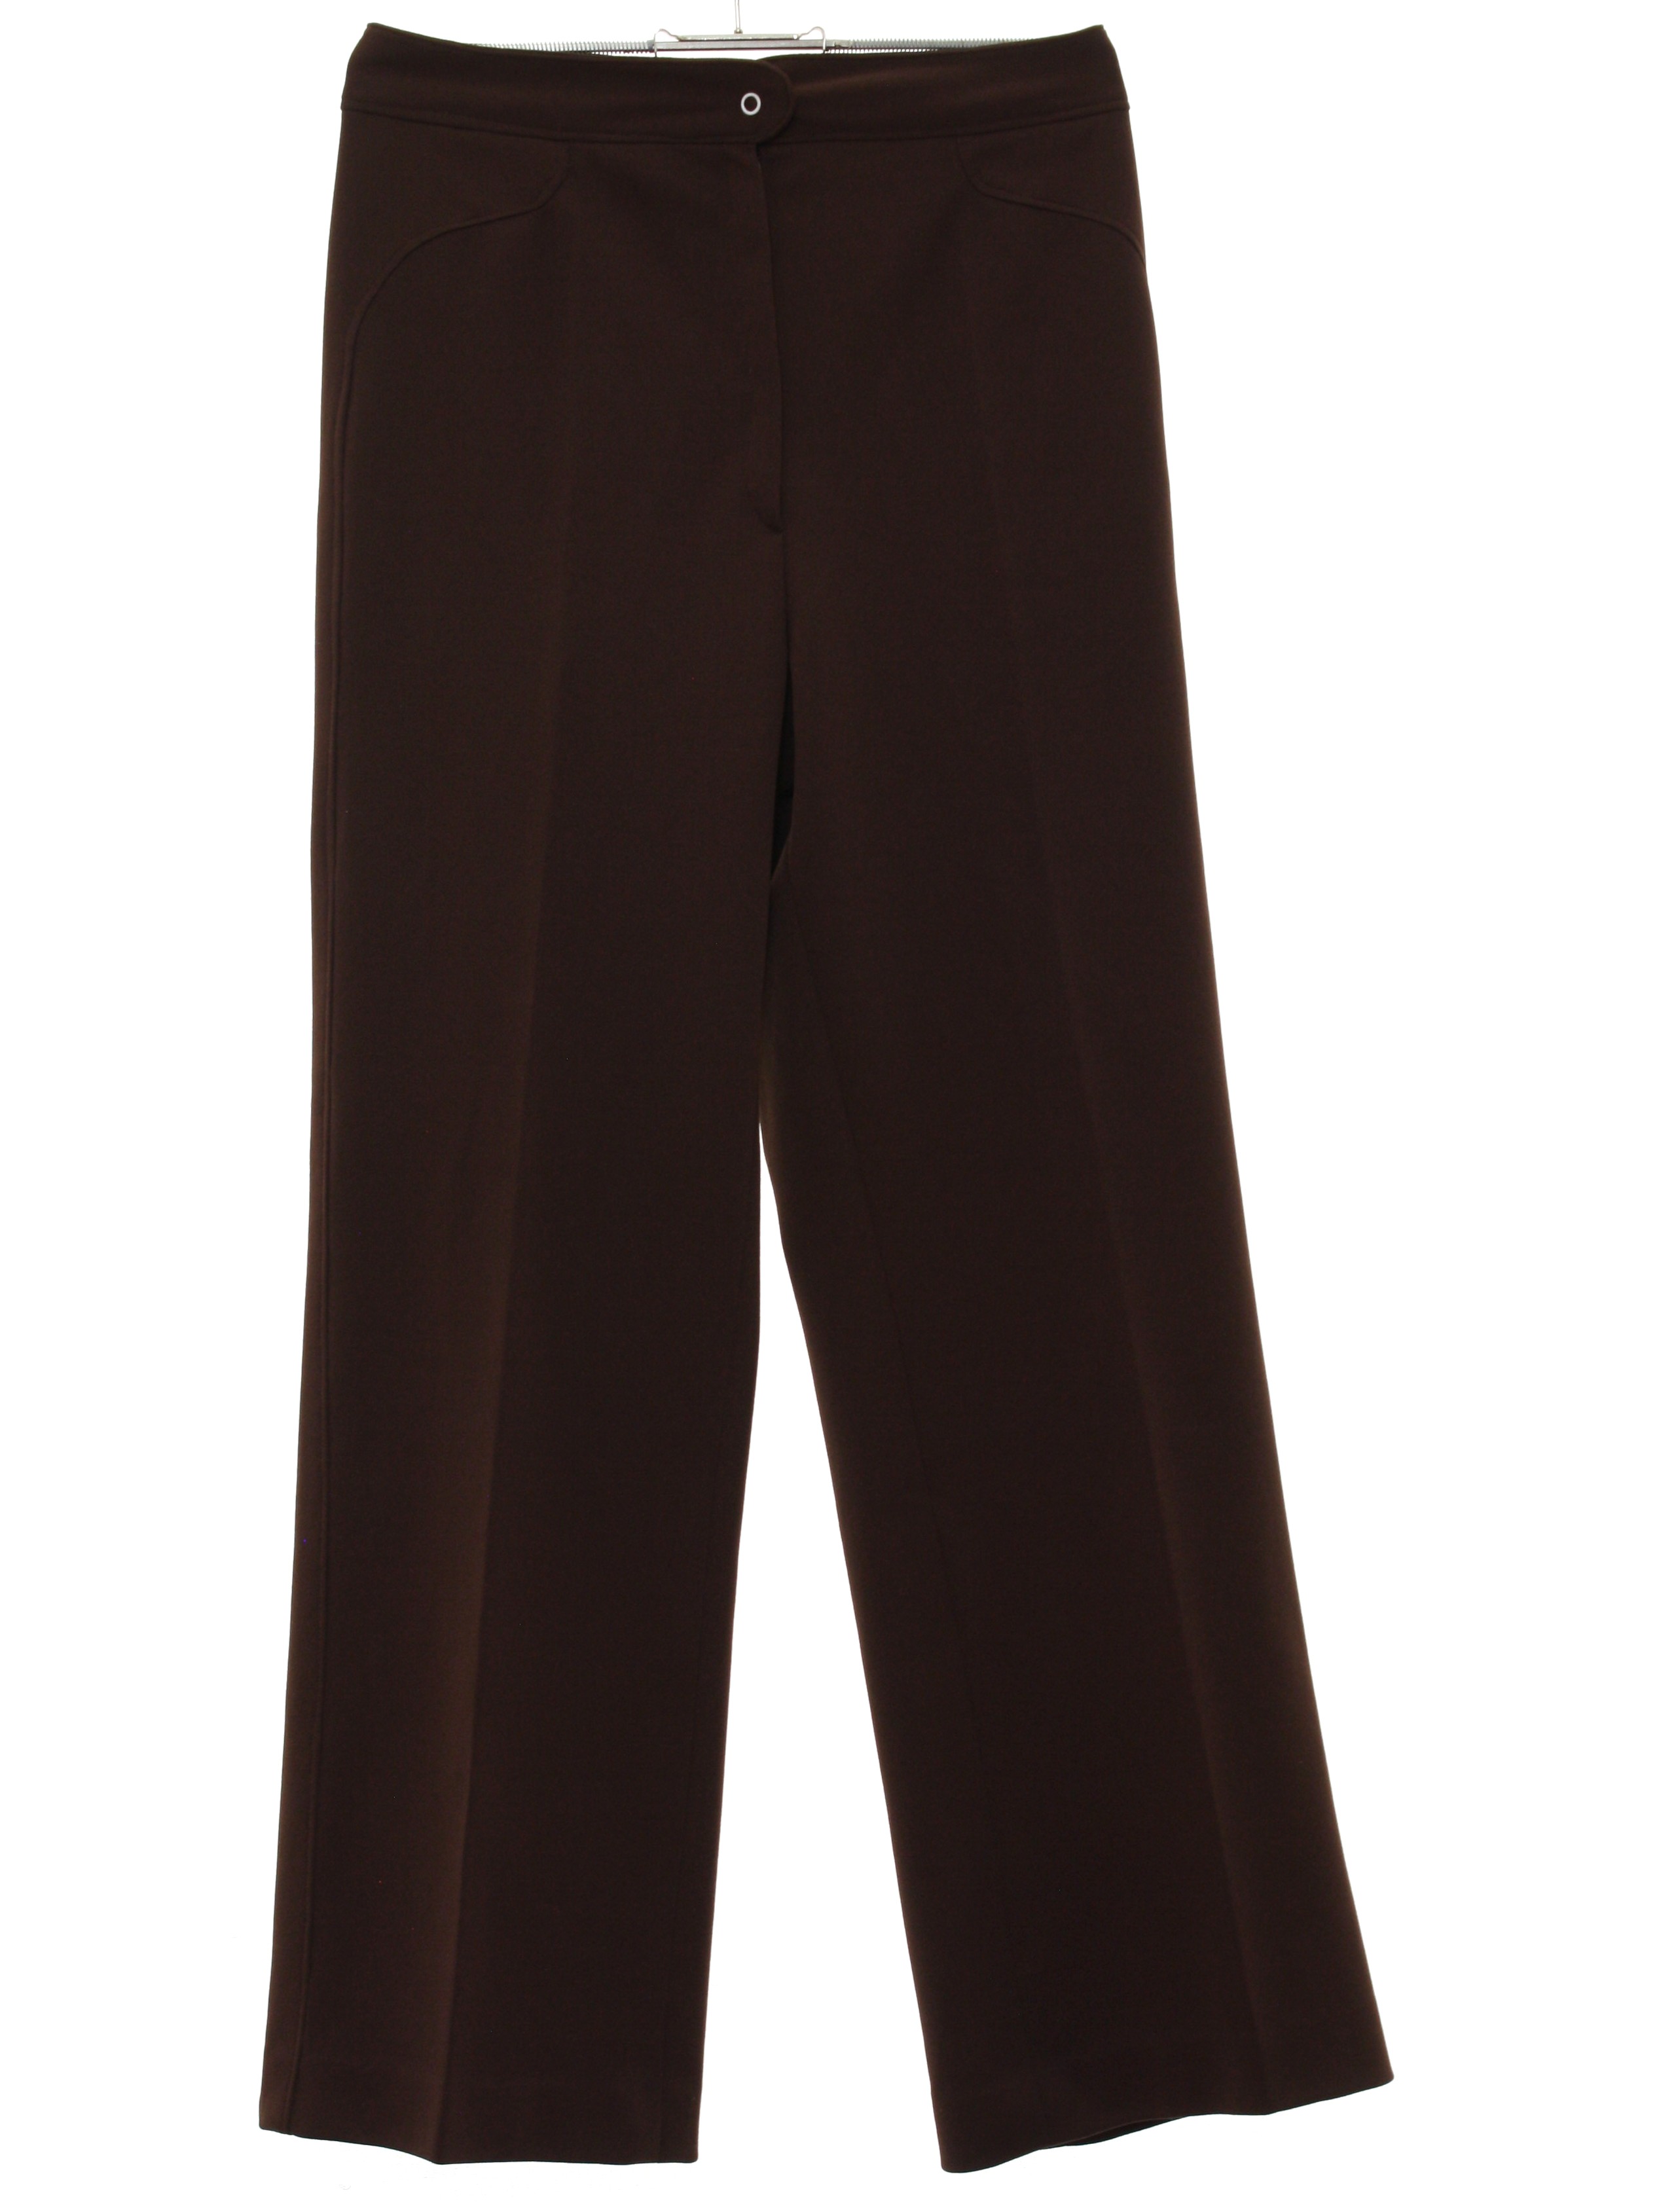 Retro 1970's Flared Pants / Flares (Missing Label) : 70s -Missing Label ...